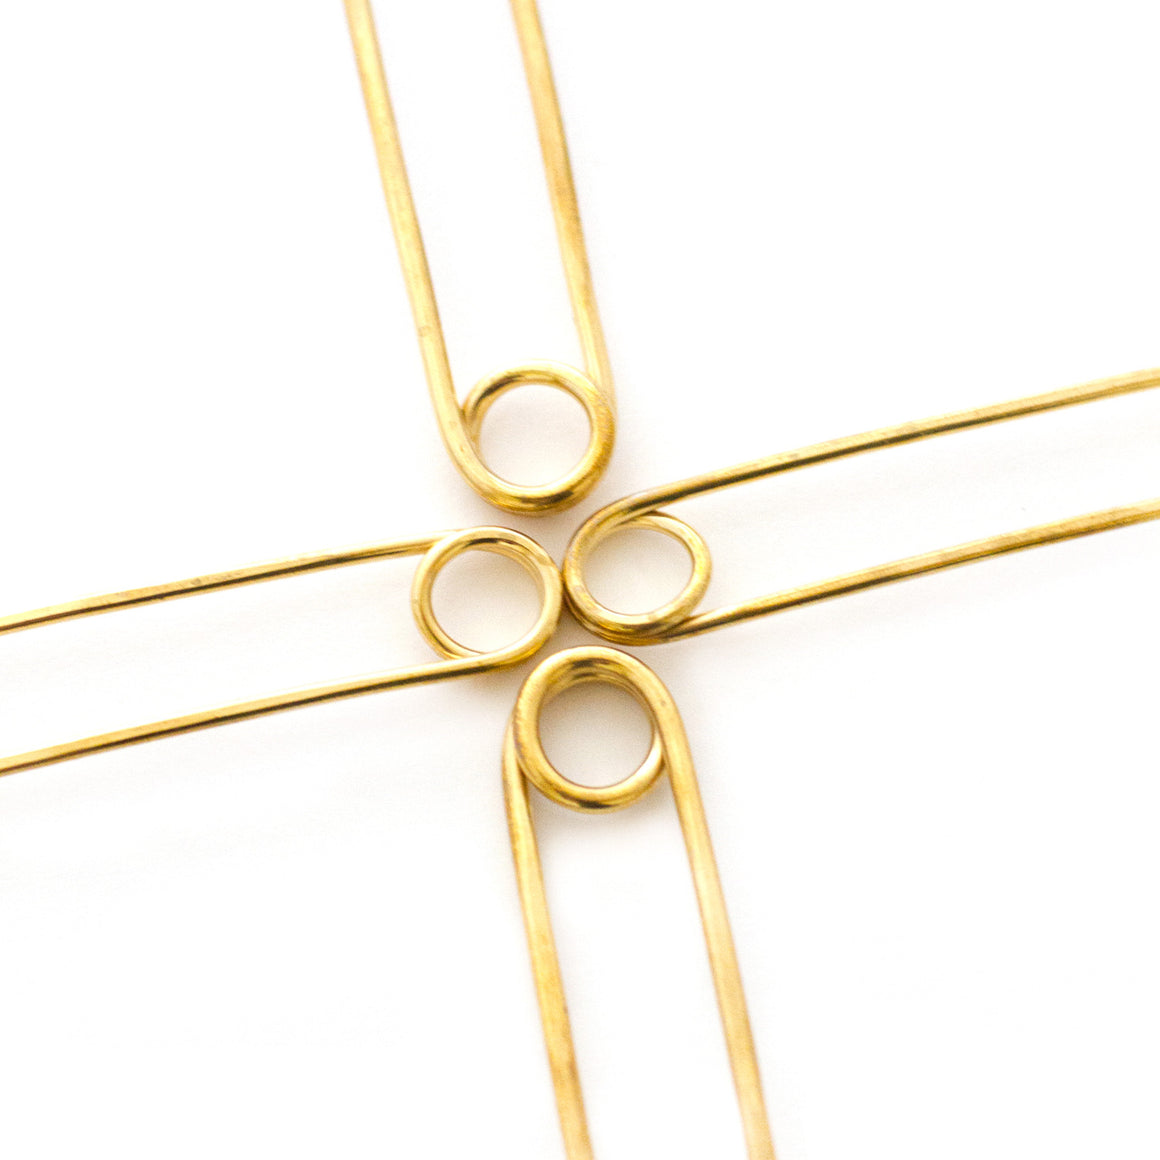 brass loop hair pins for buns and top knots. made in california by mane message